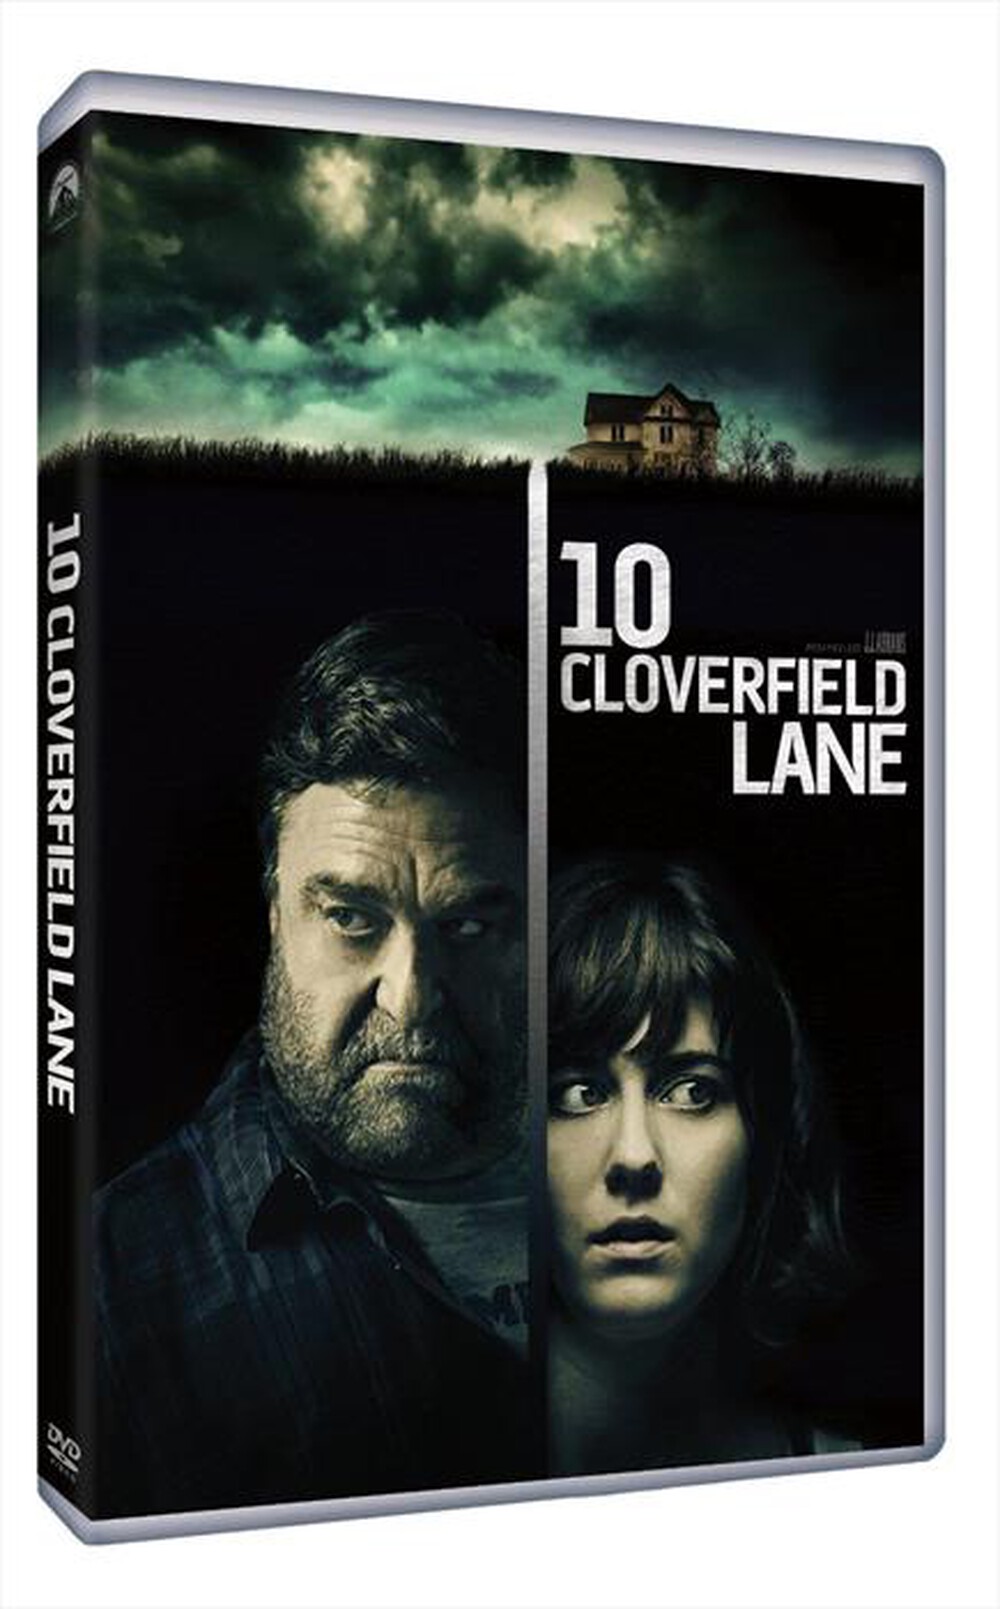 "UNIVERSAL PICTURES - 10 Cloverfield Lane"